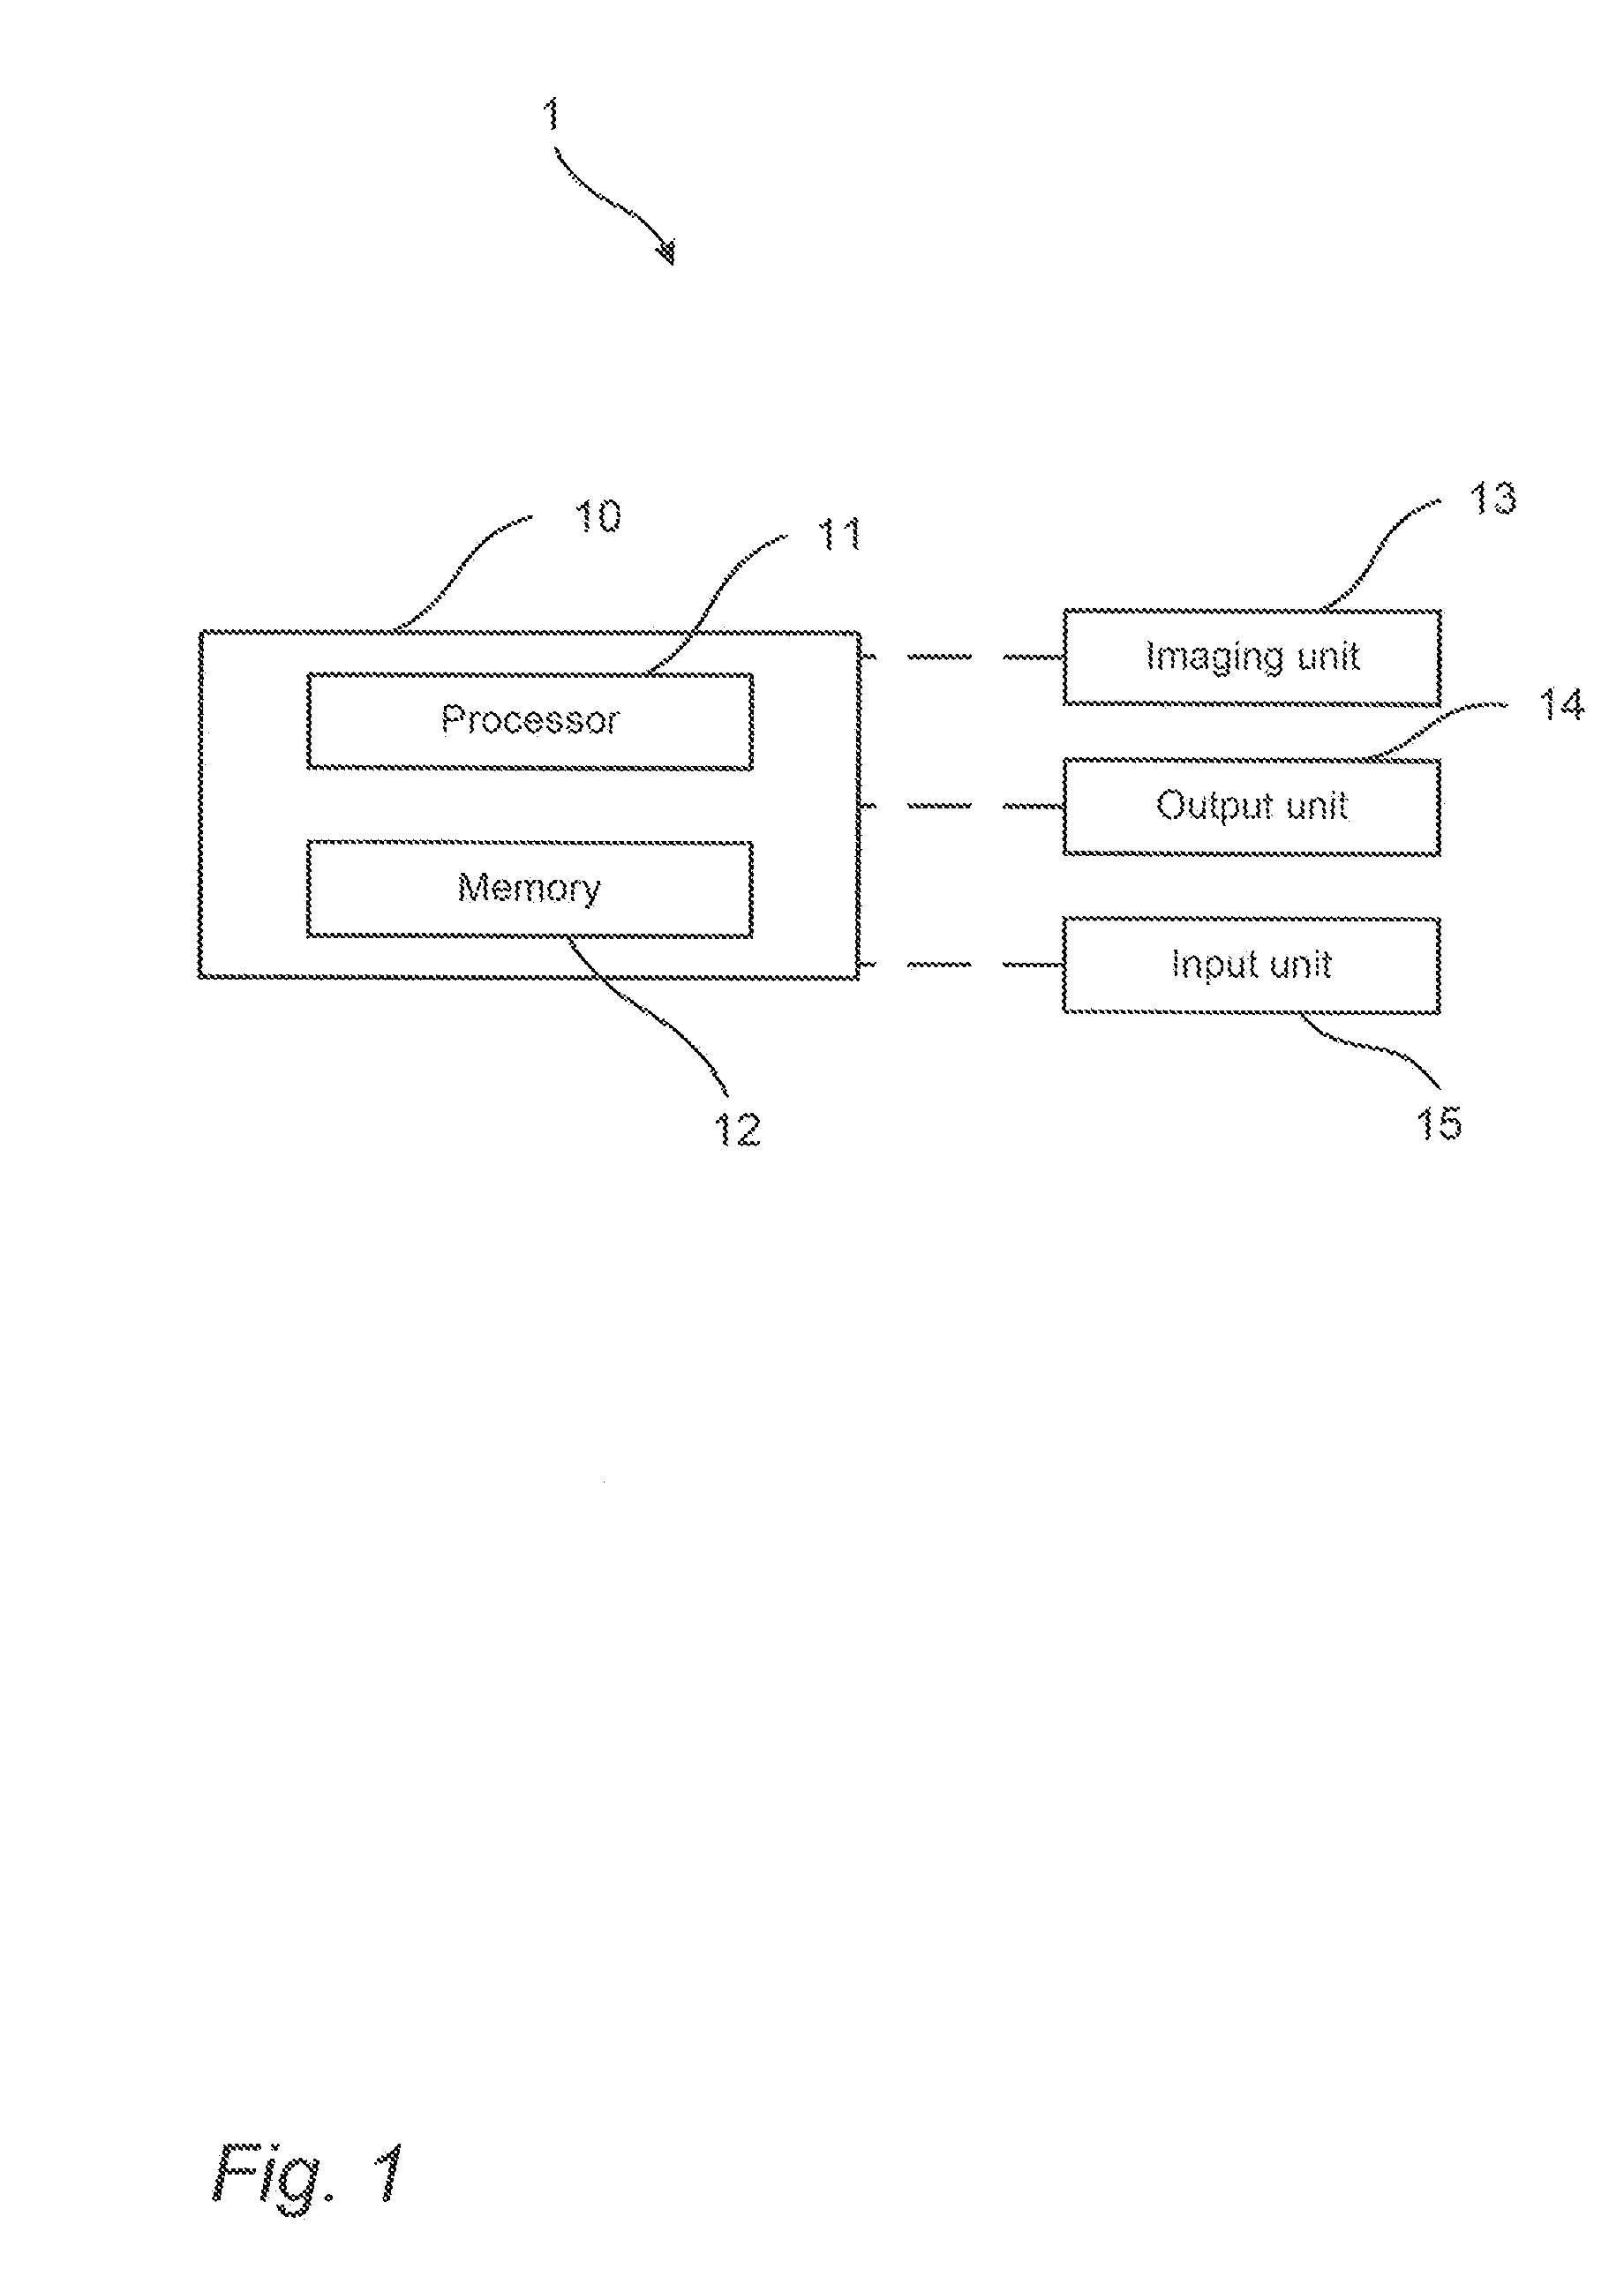 Method for providing images of a tissue section